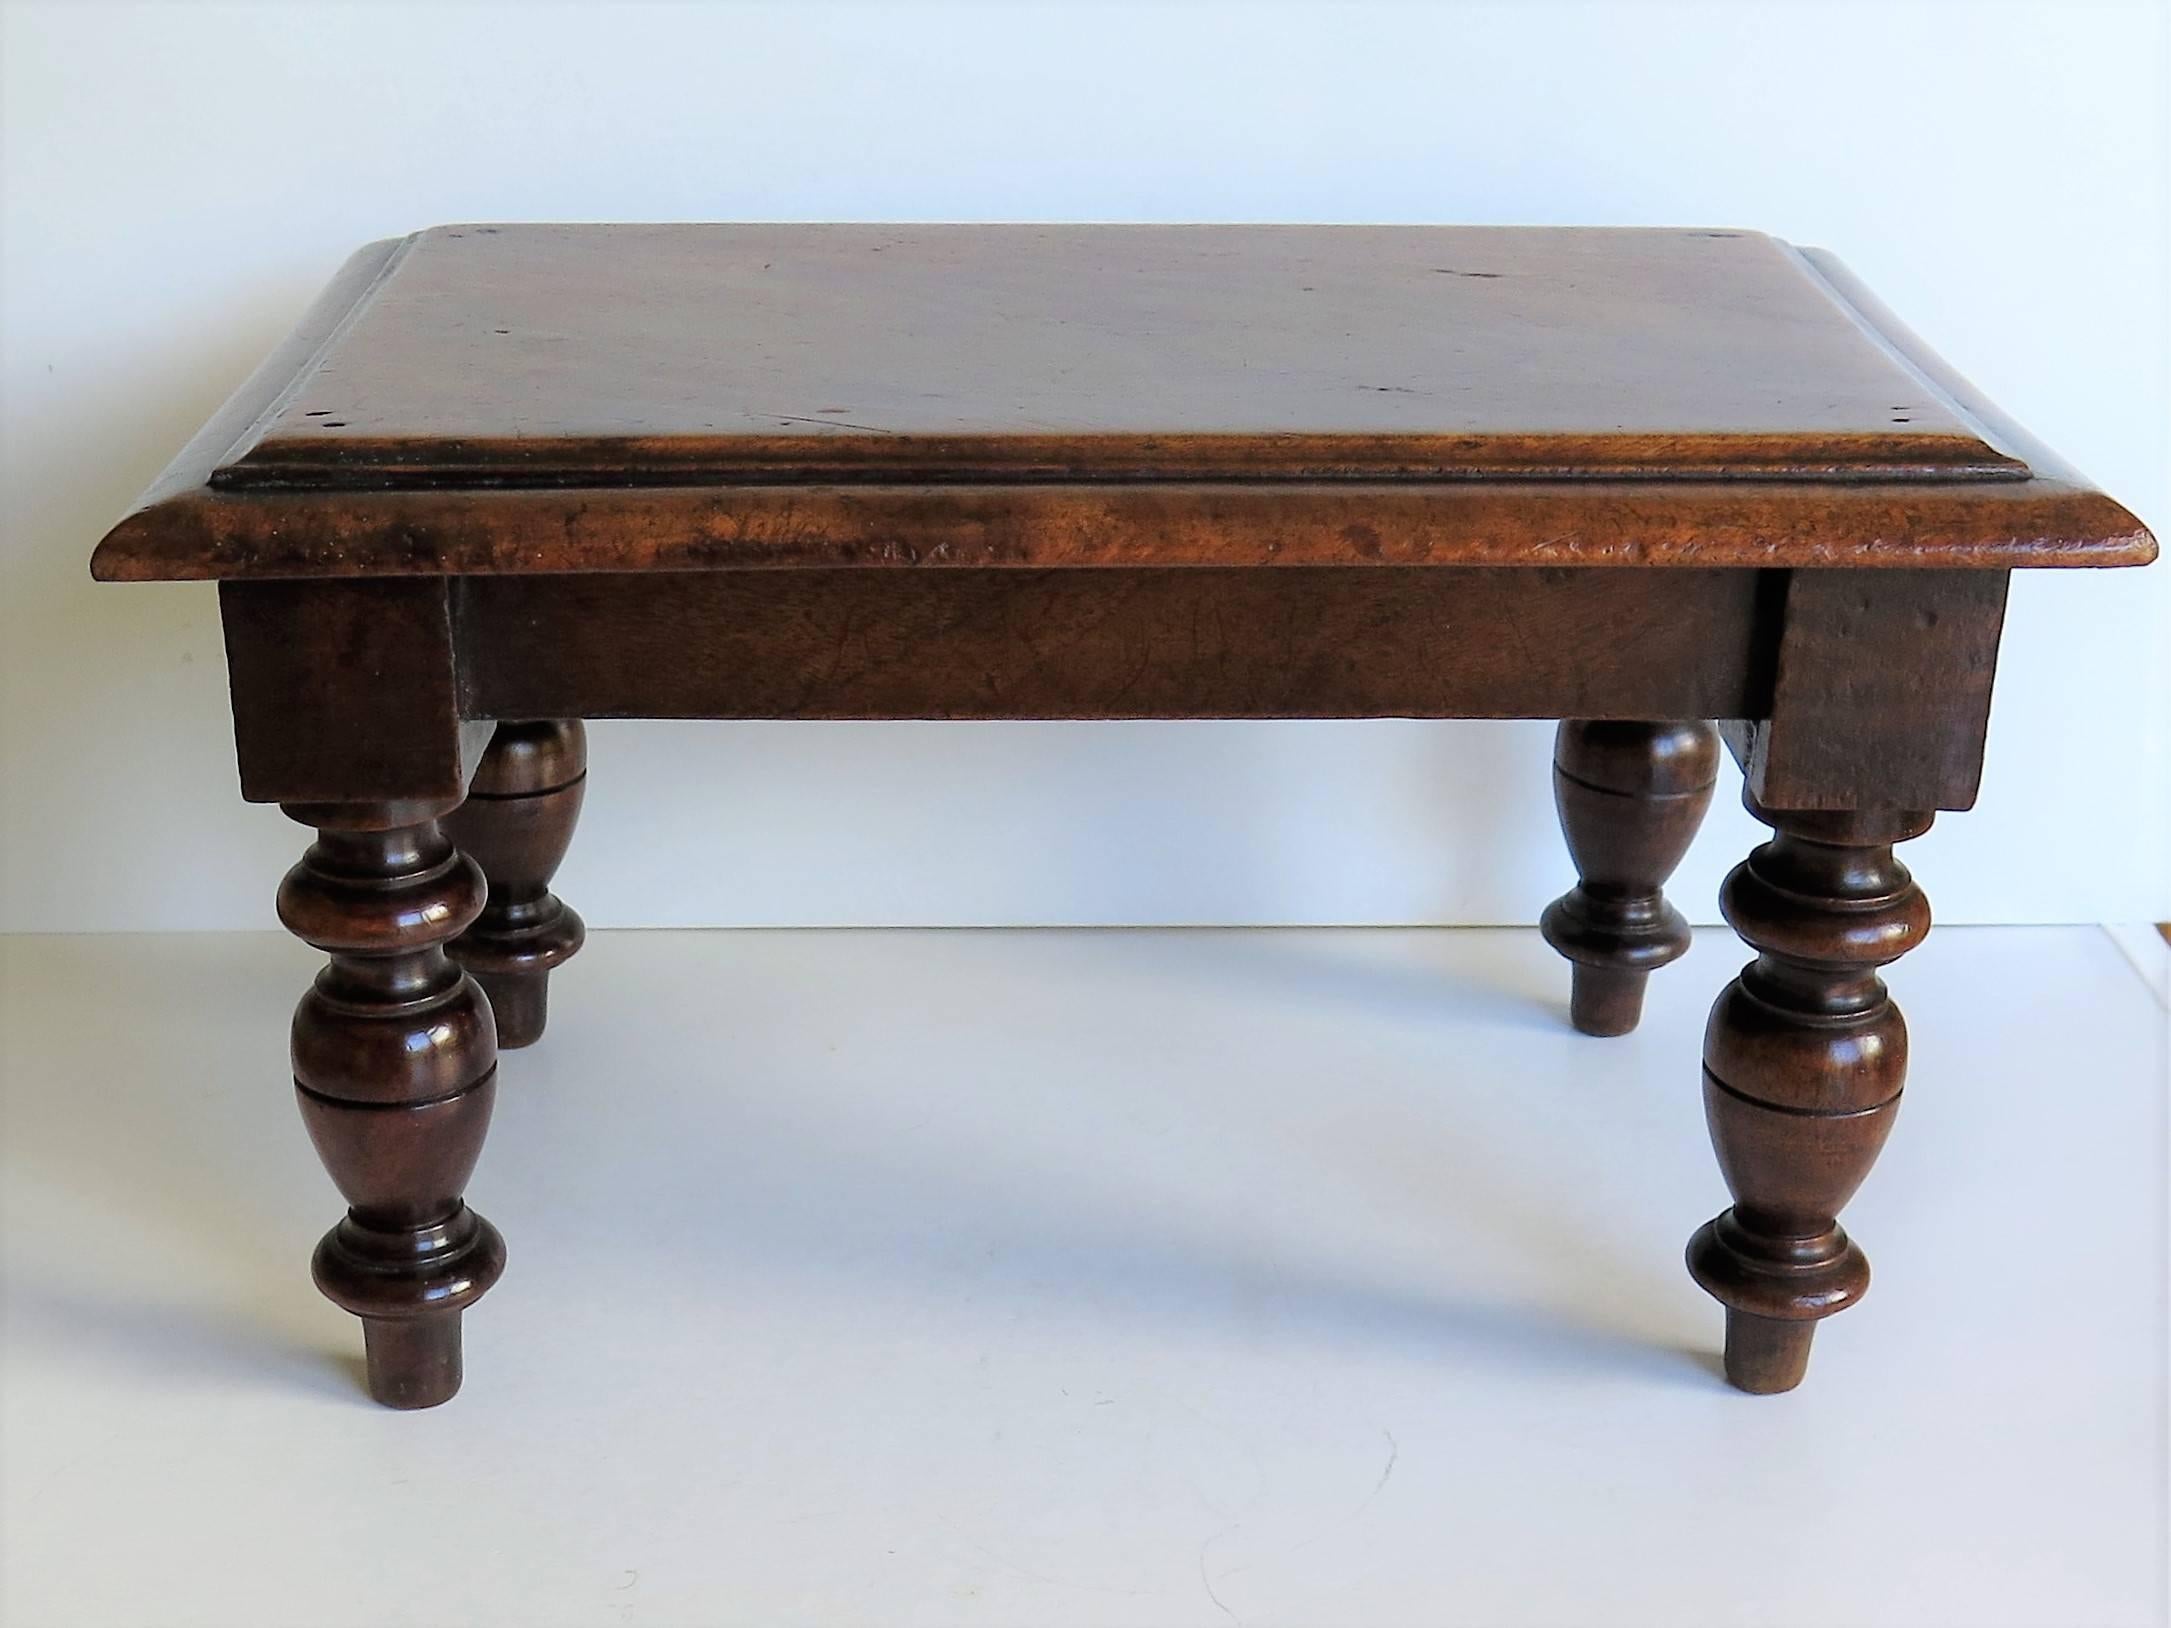 This is an unusual English low stand, candle stand or stool.

The top is rectangular, handmade from a single solid piece of mahogany or fruitwood, with a good molded edge. This top has developed a beautiful natural color and patina over many years